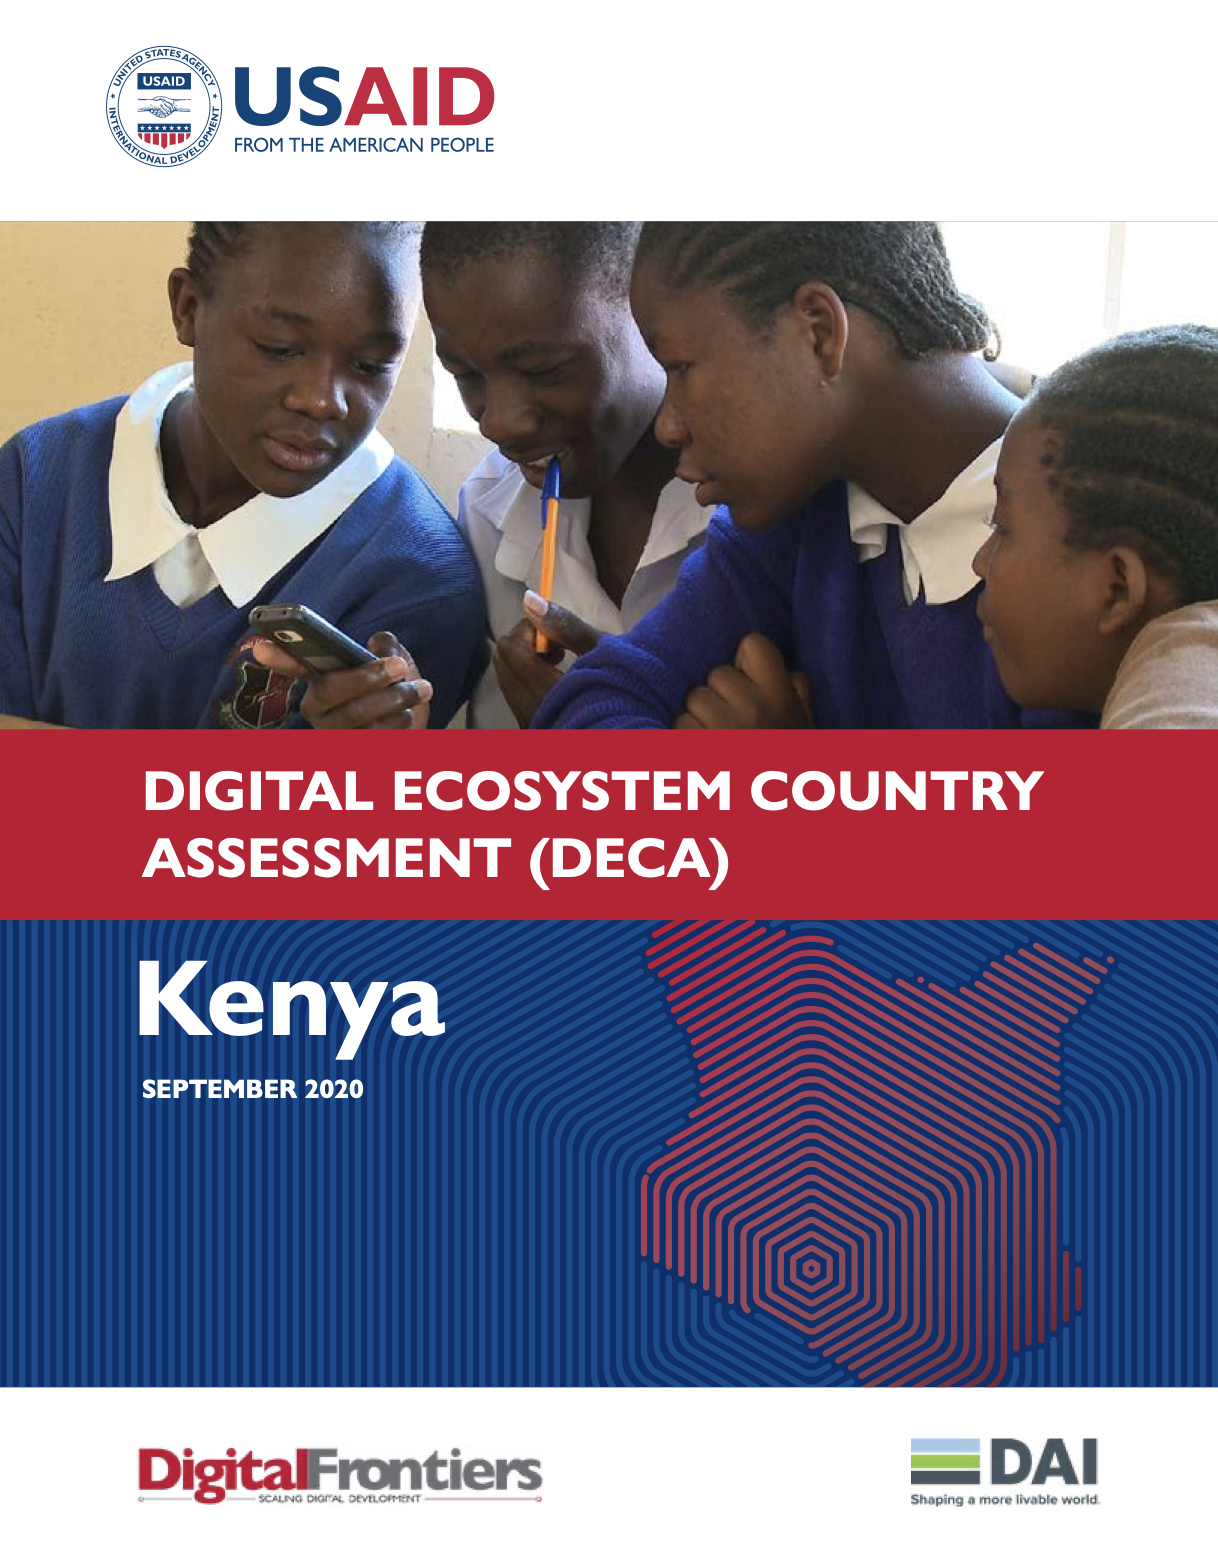 Four students looking at a cell phone on the cover of Kenya's Digital Ecosystem Country Assessment (DECA).